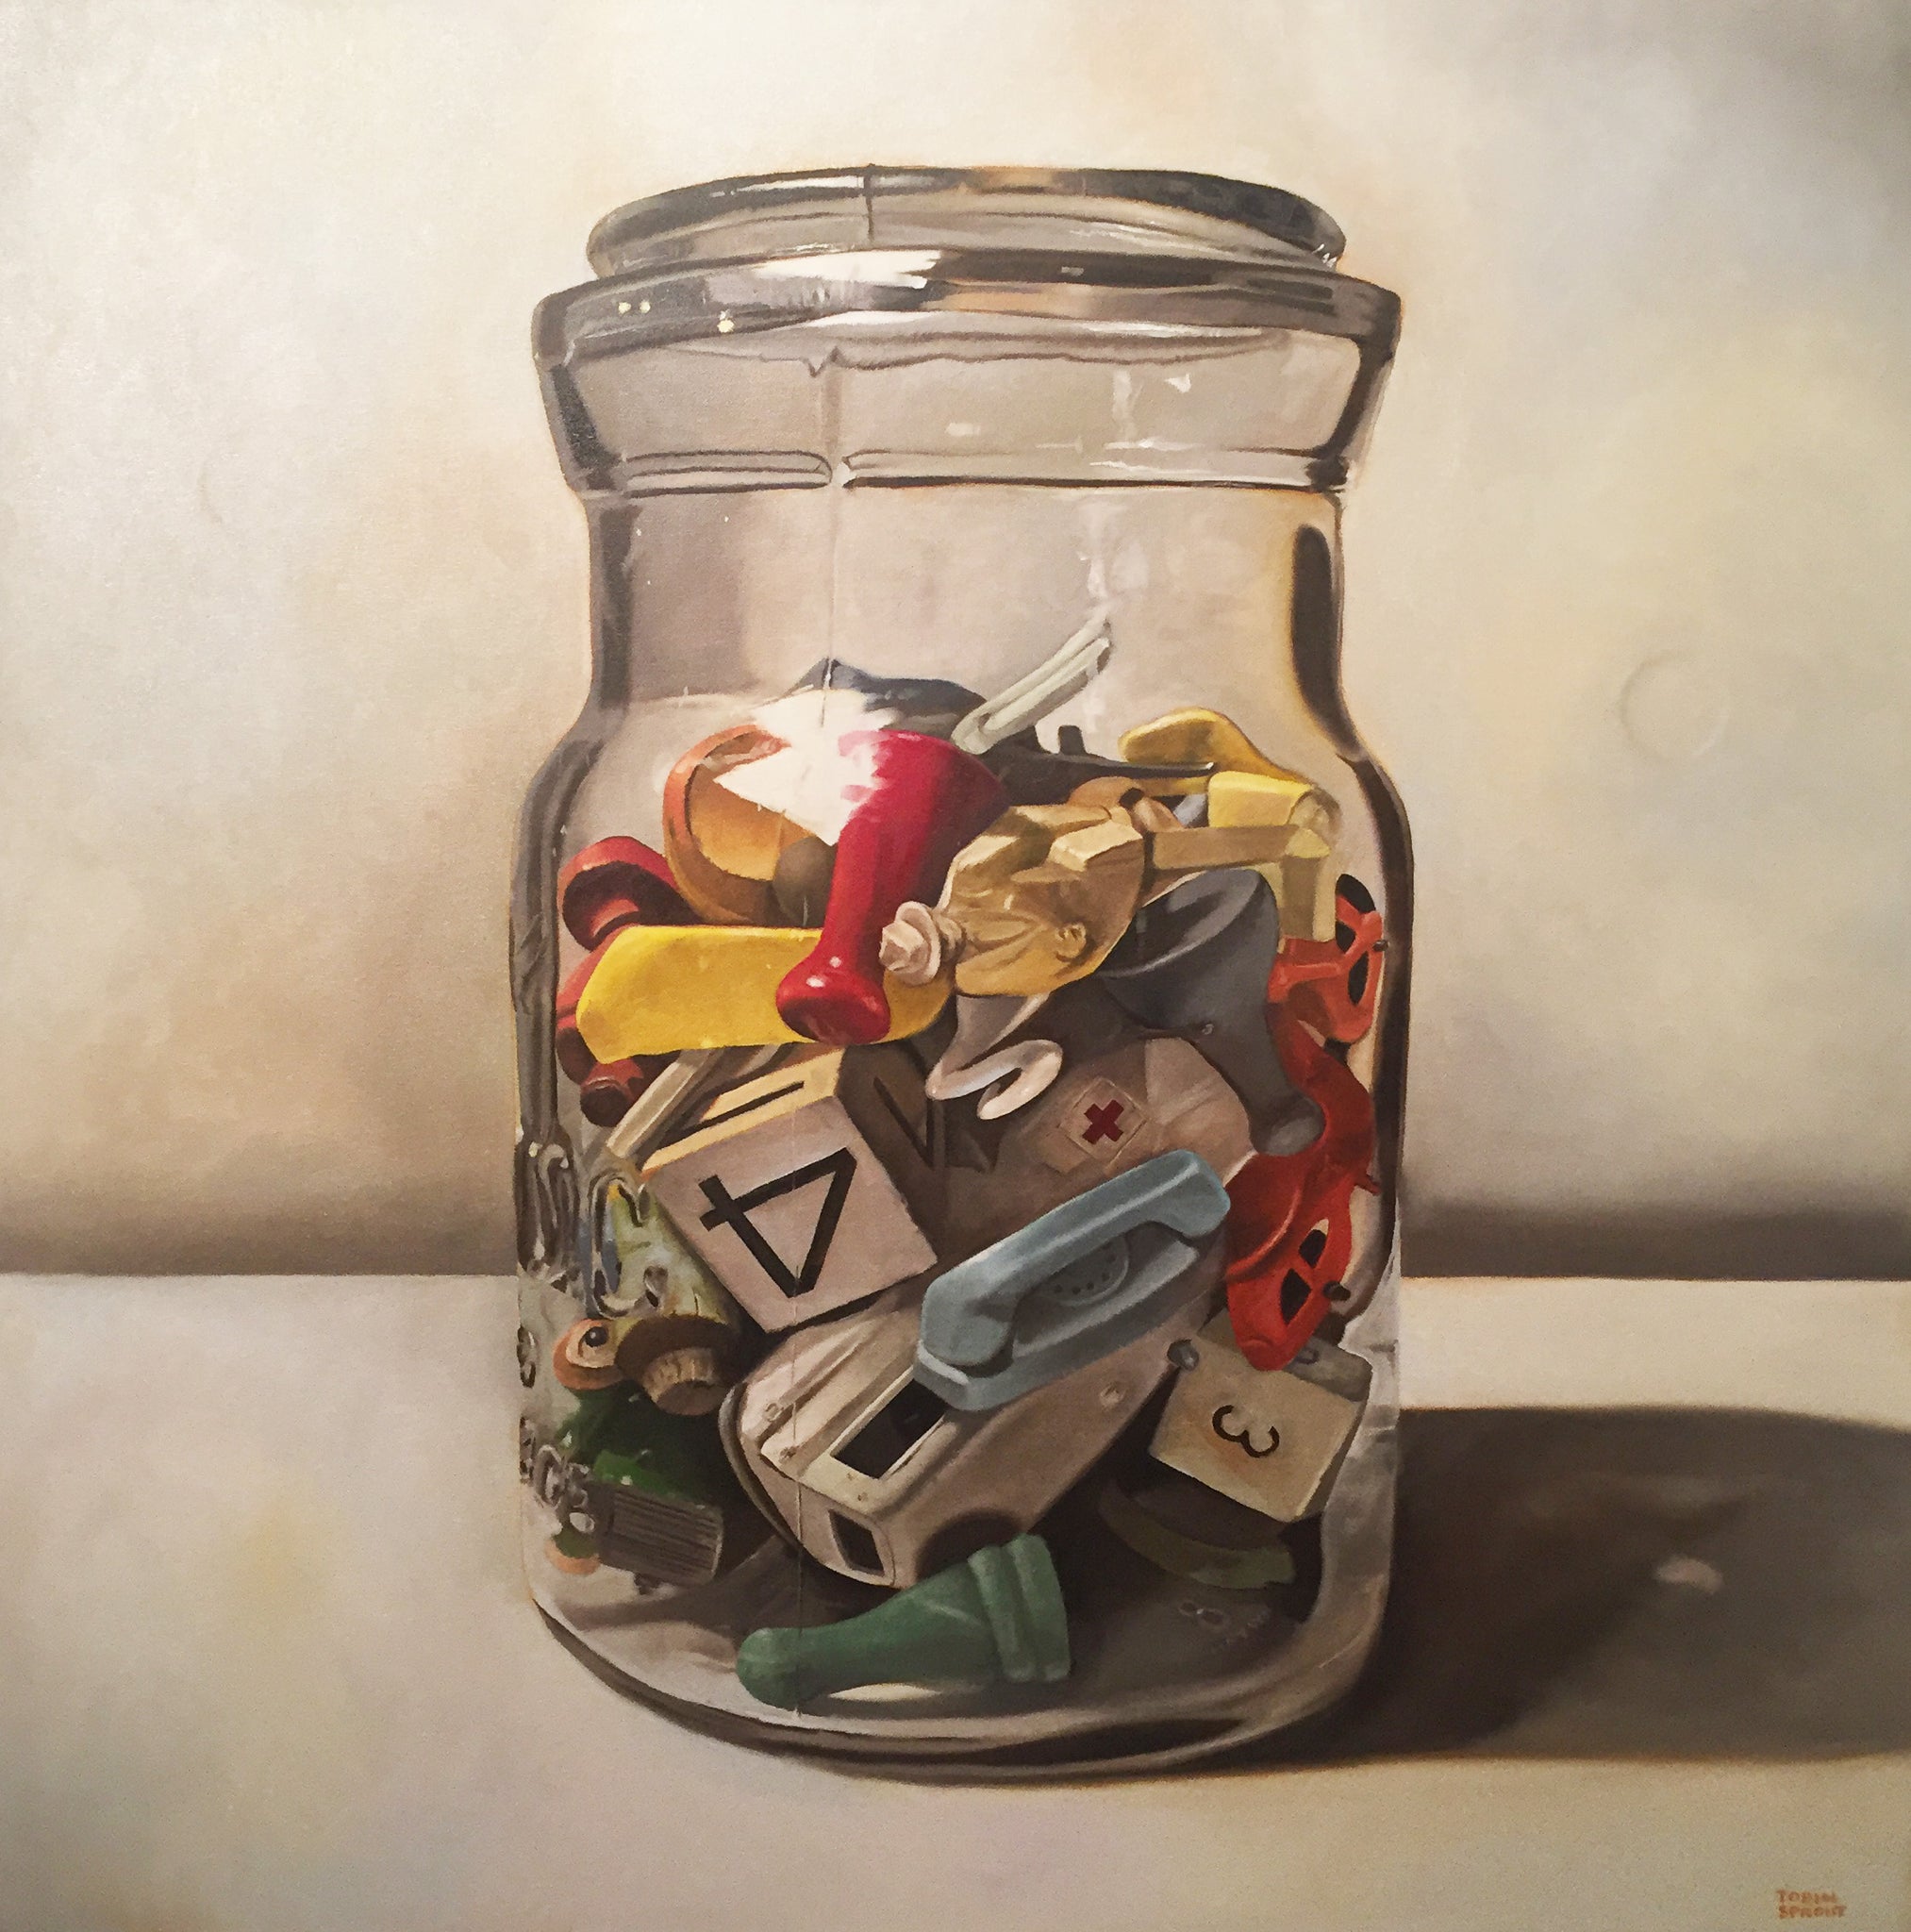 Oil painting of a clear glass jar filled with game pieces. Oil on canvas by Tobin Sprout